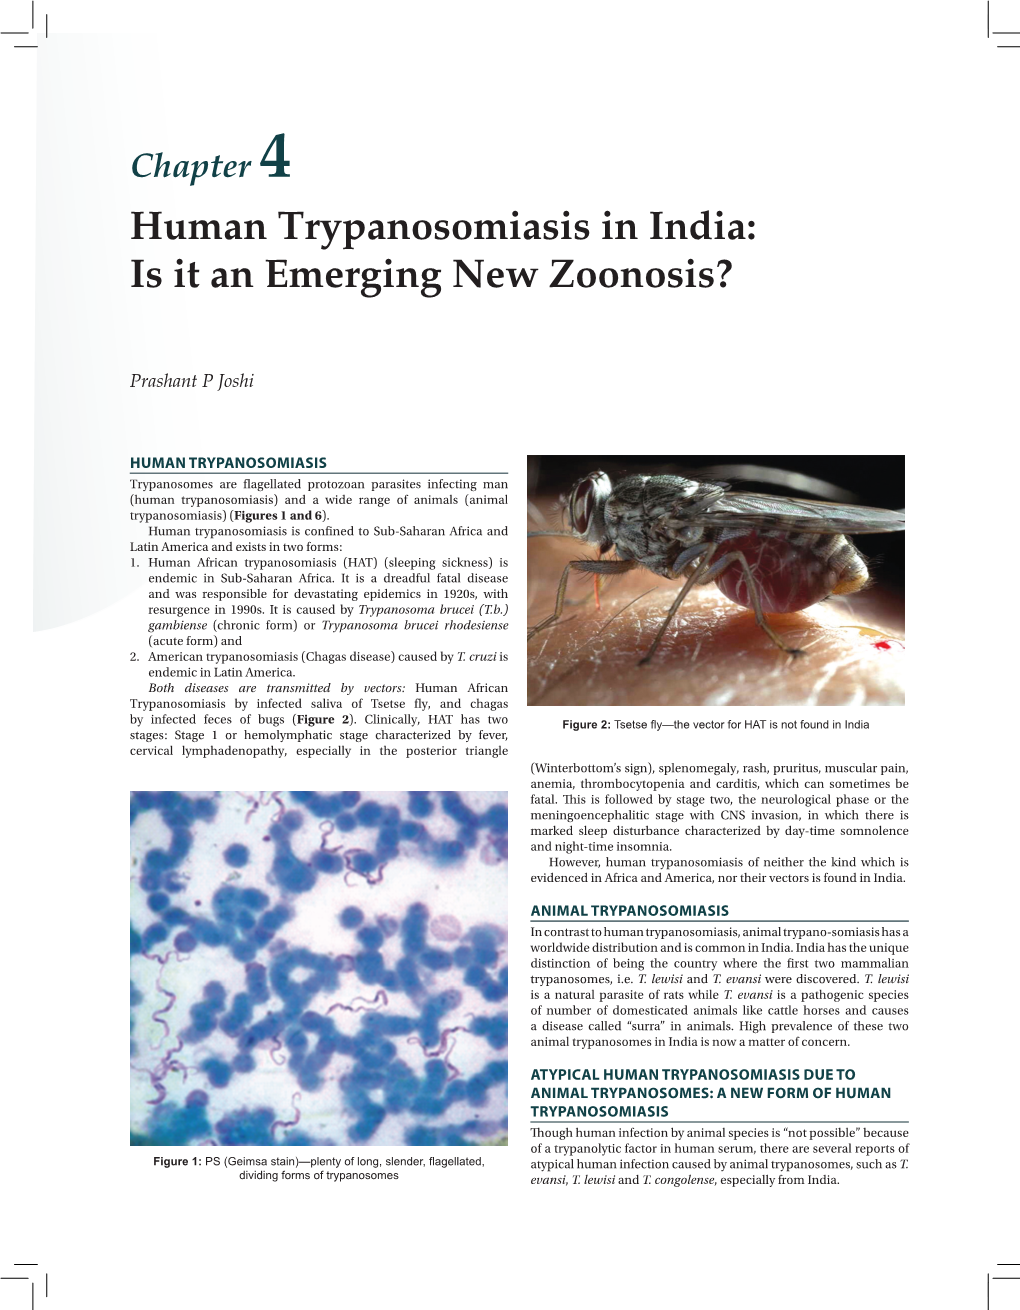 Human Trypanosomiasis in India: Is It an Emerging New Zoonosis?